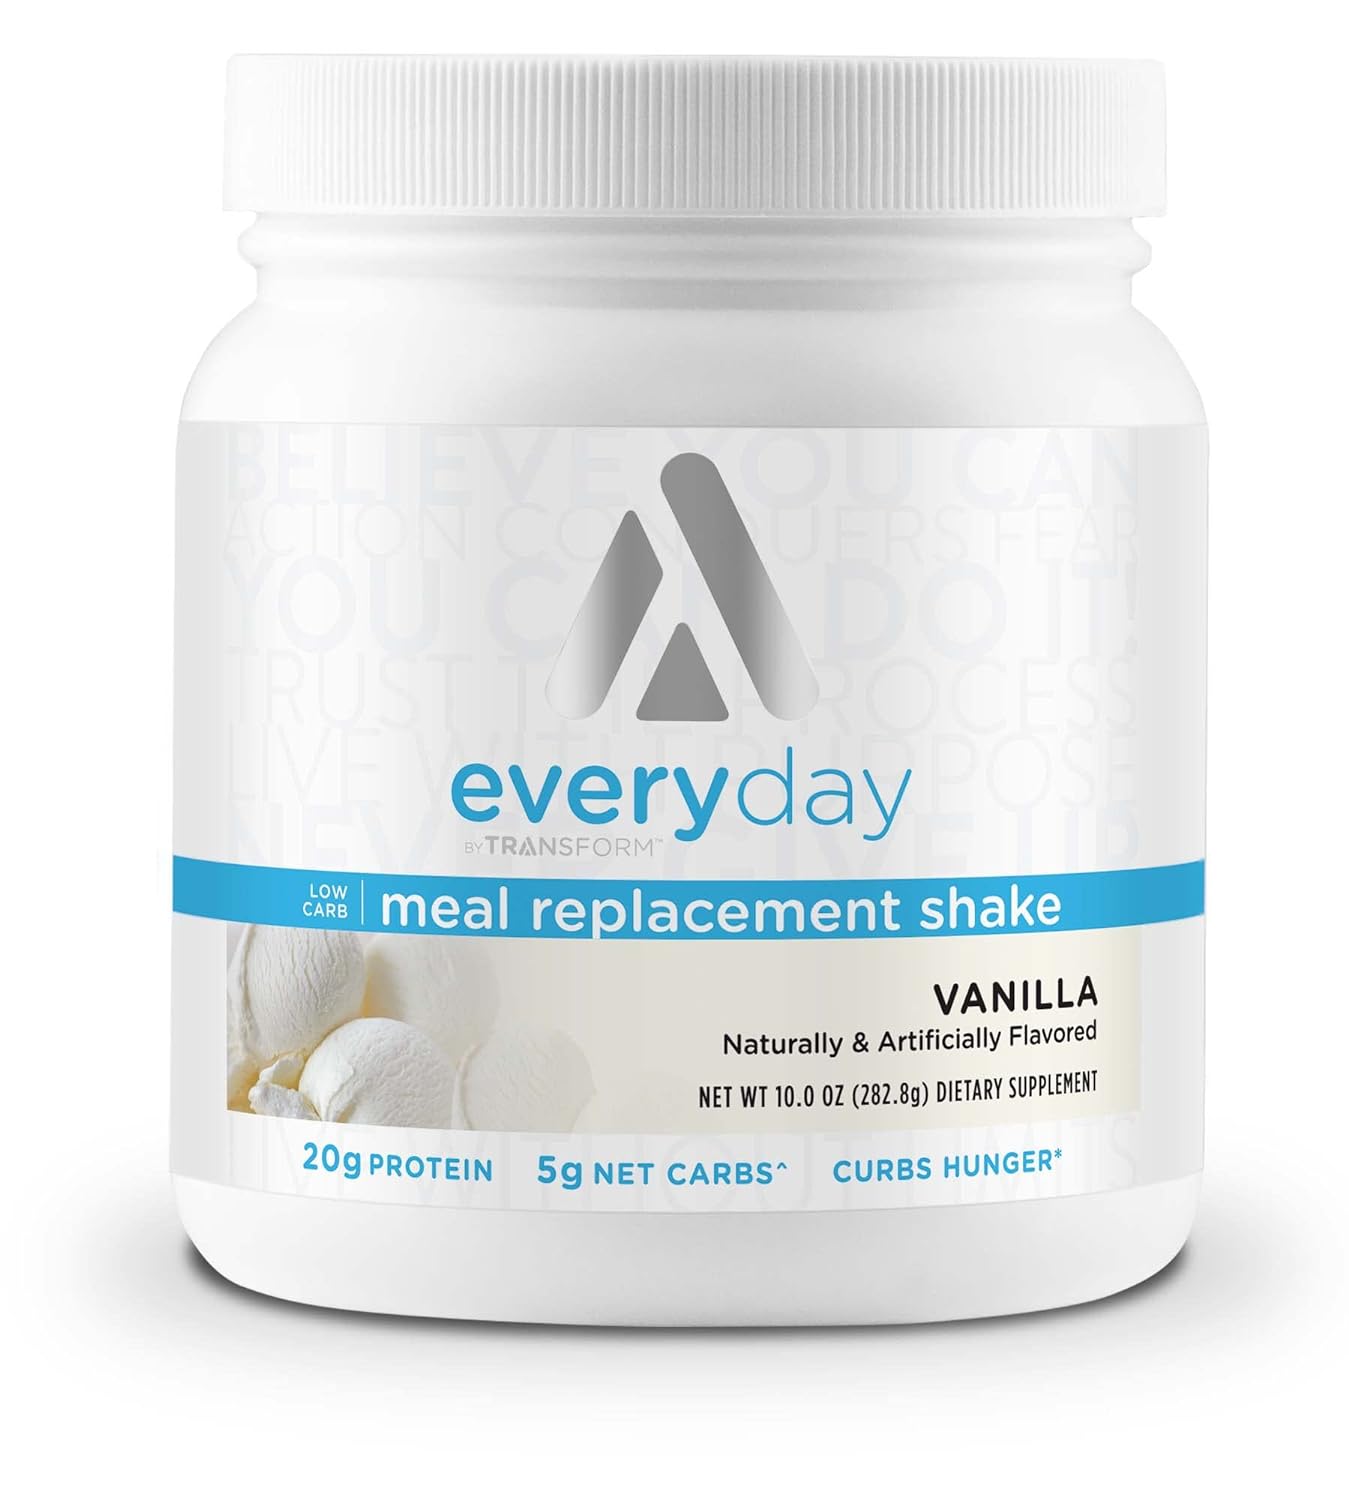 TransformHQ Meal Replacement Shake Powder 7 Servings (Vanilla) - Glute